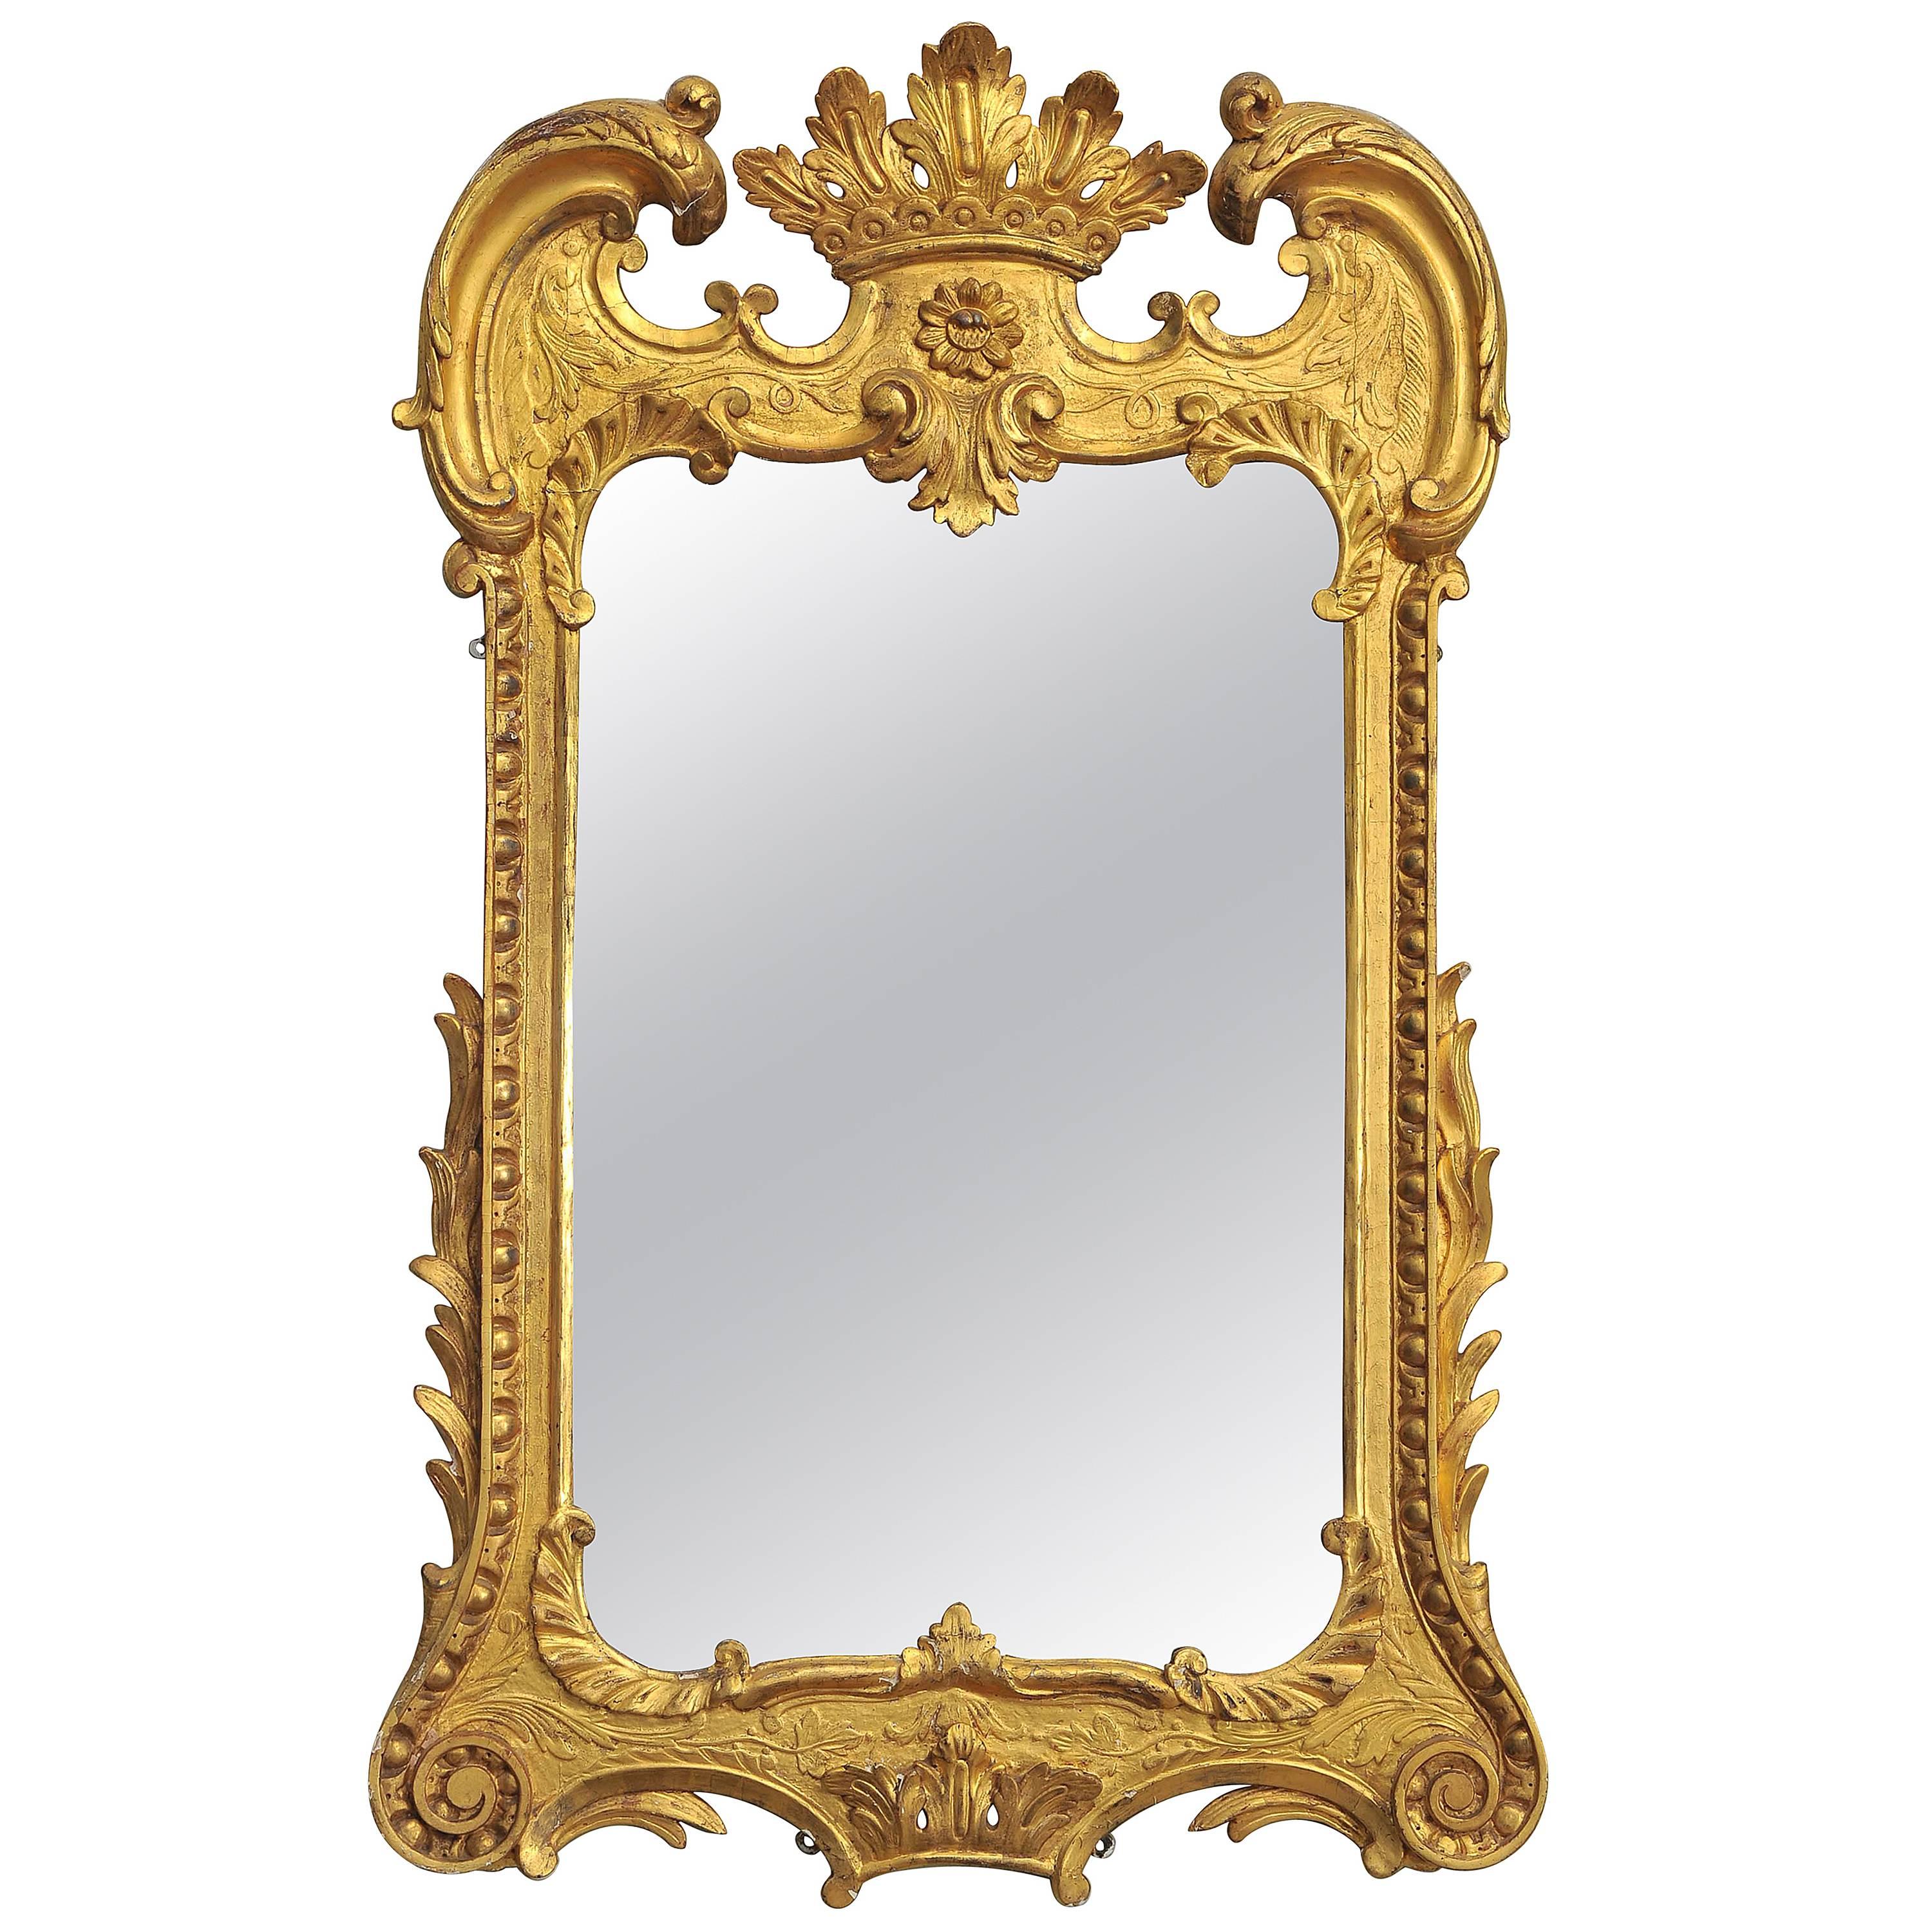 Unusual 18th Century Carved Giltwood Wall Mirror For Sale